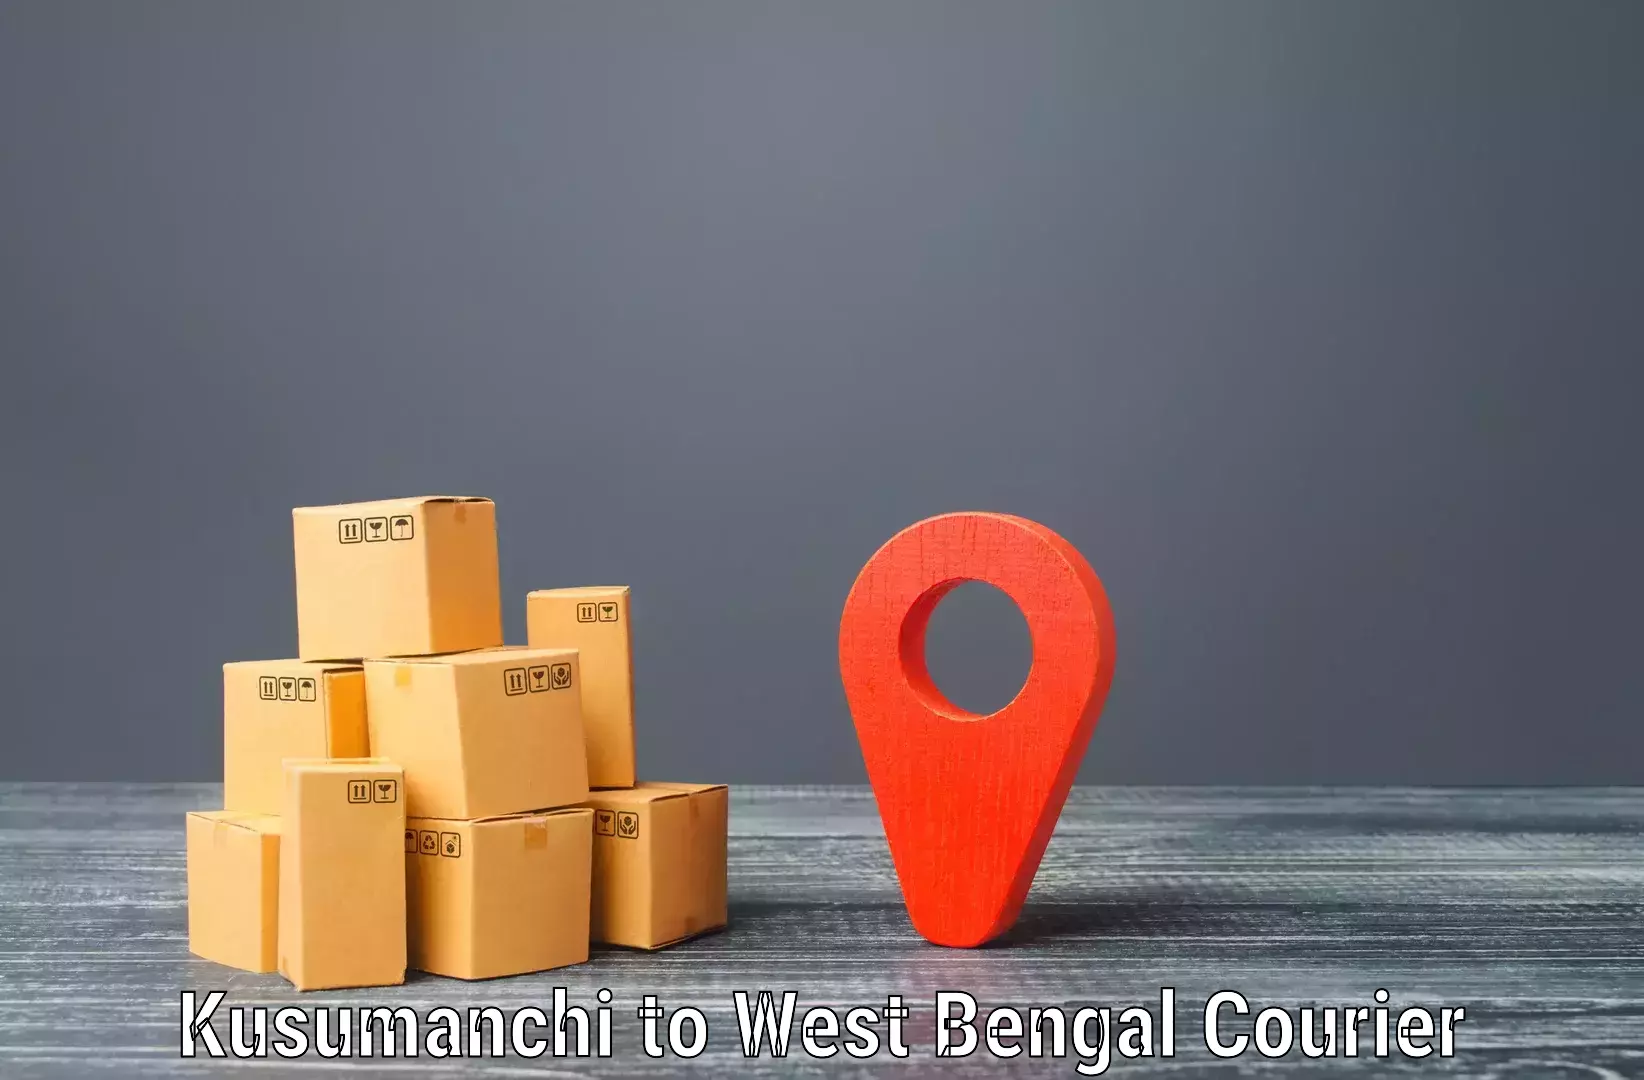 Courier services in Kusumanchi to Labpur